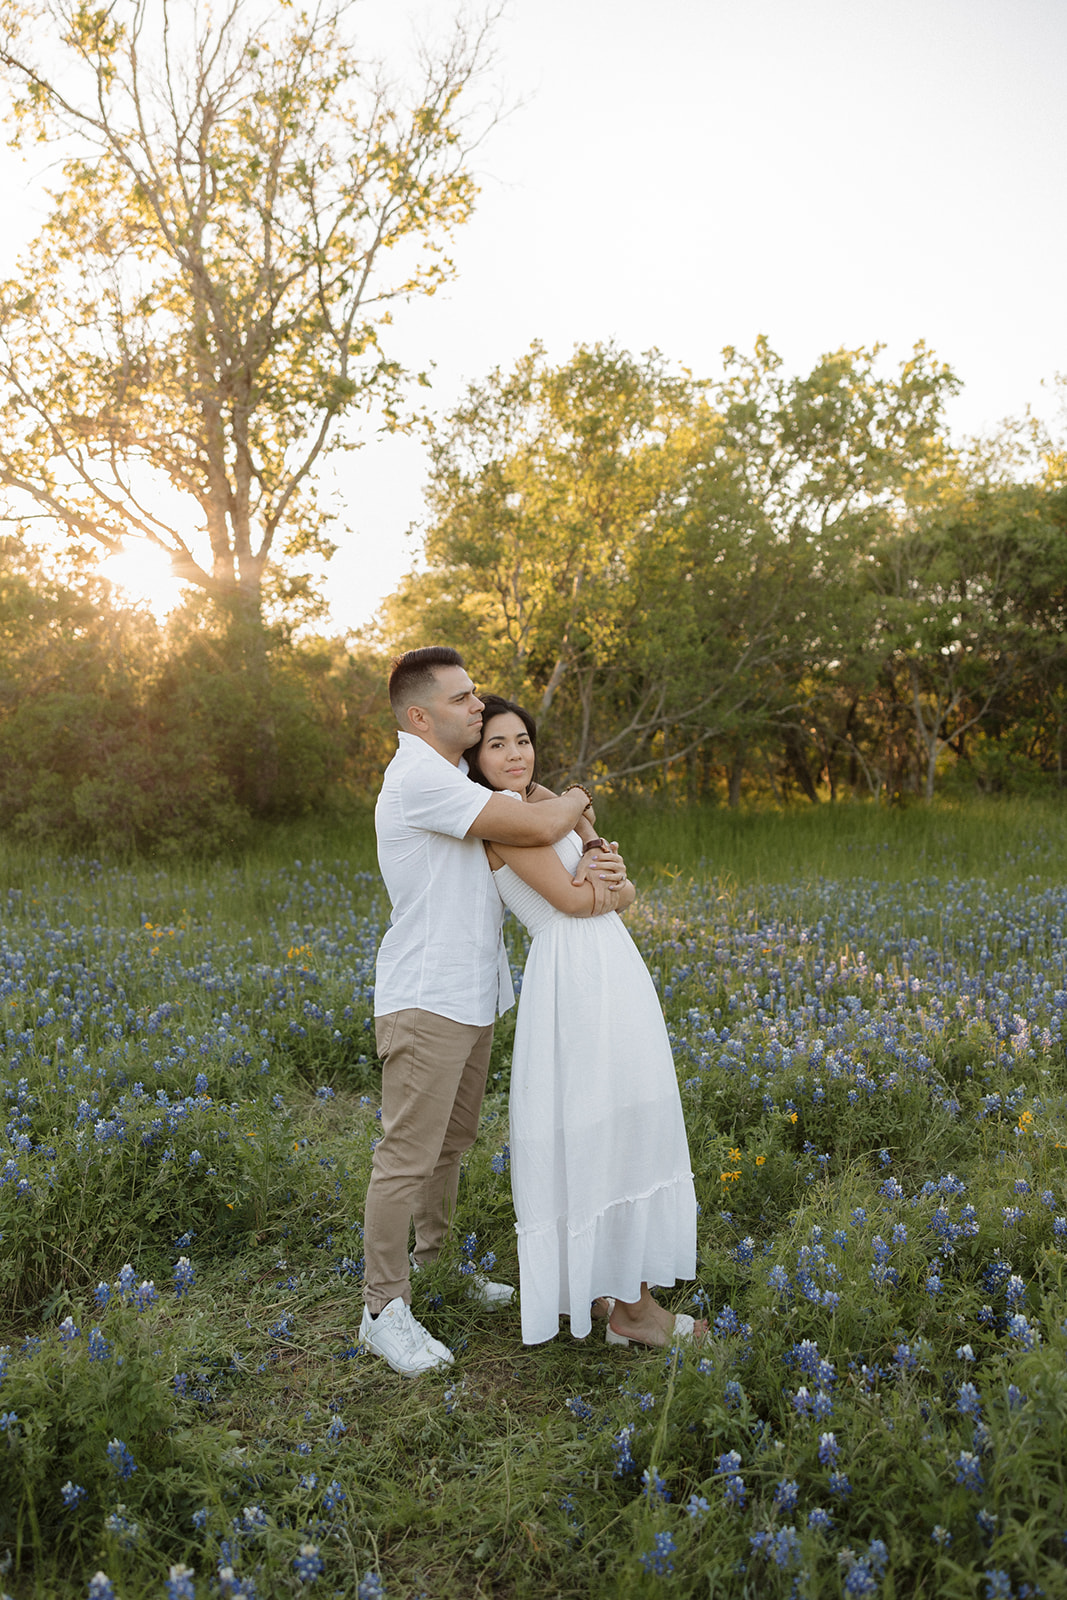 Couple wearing white hugging in a field of Bluebonnets h at McKinney Falls state park